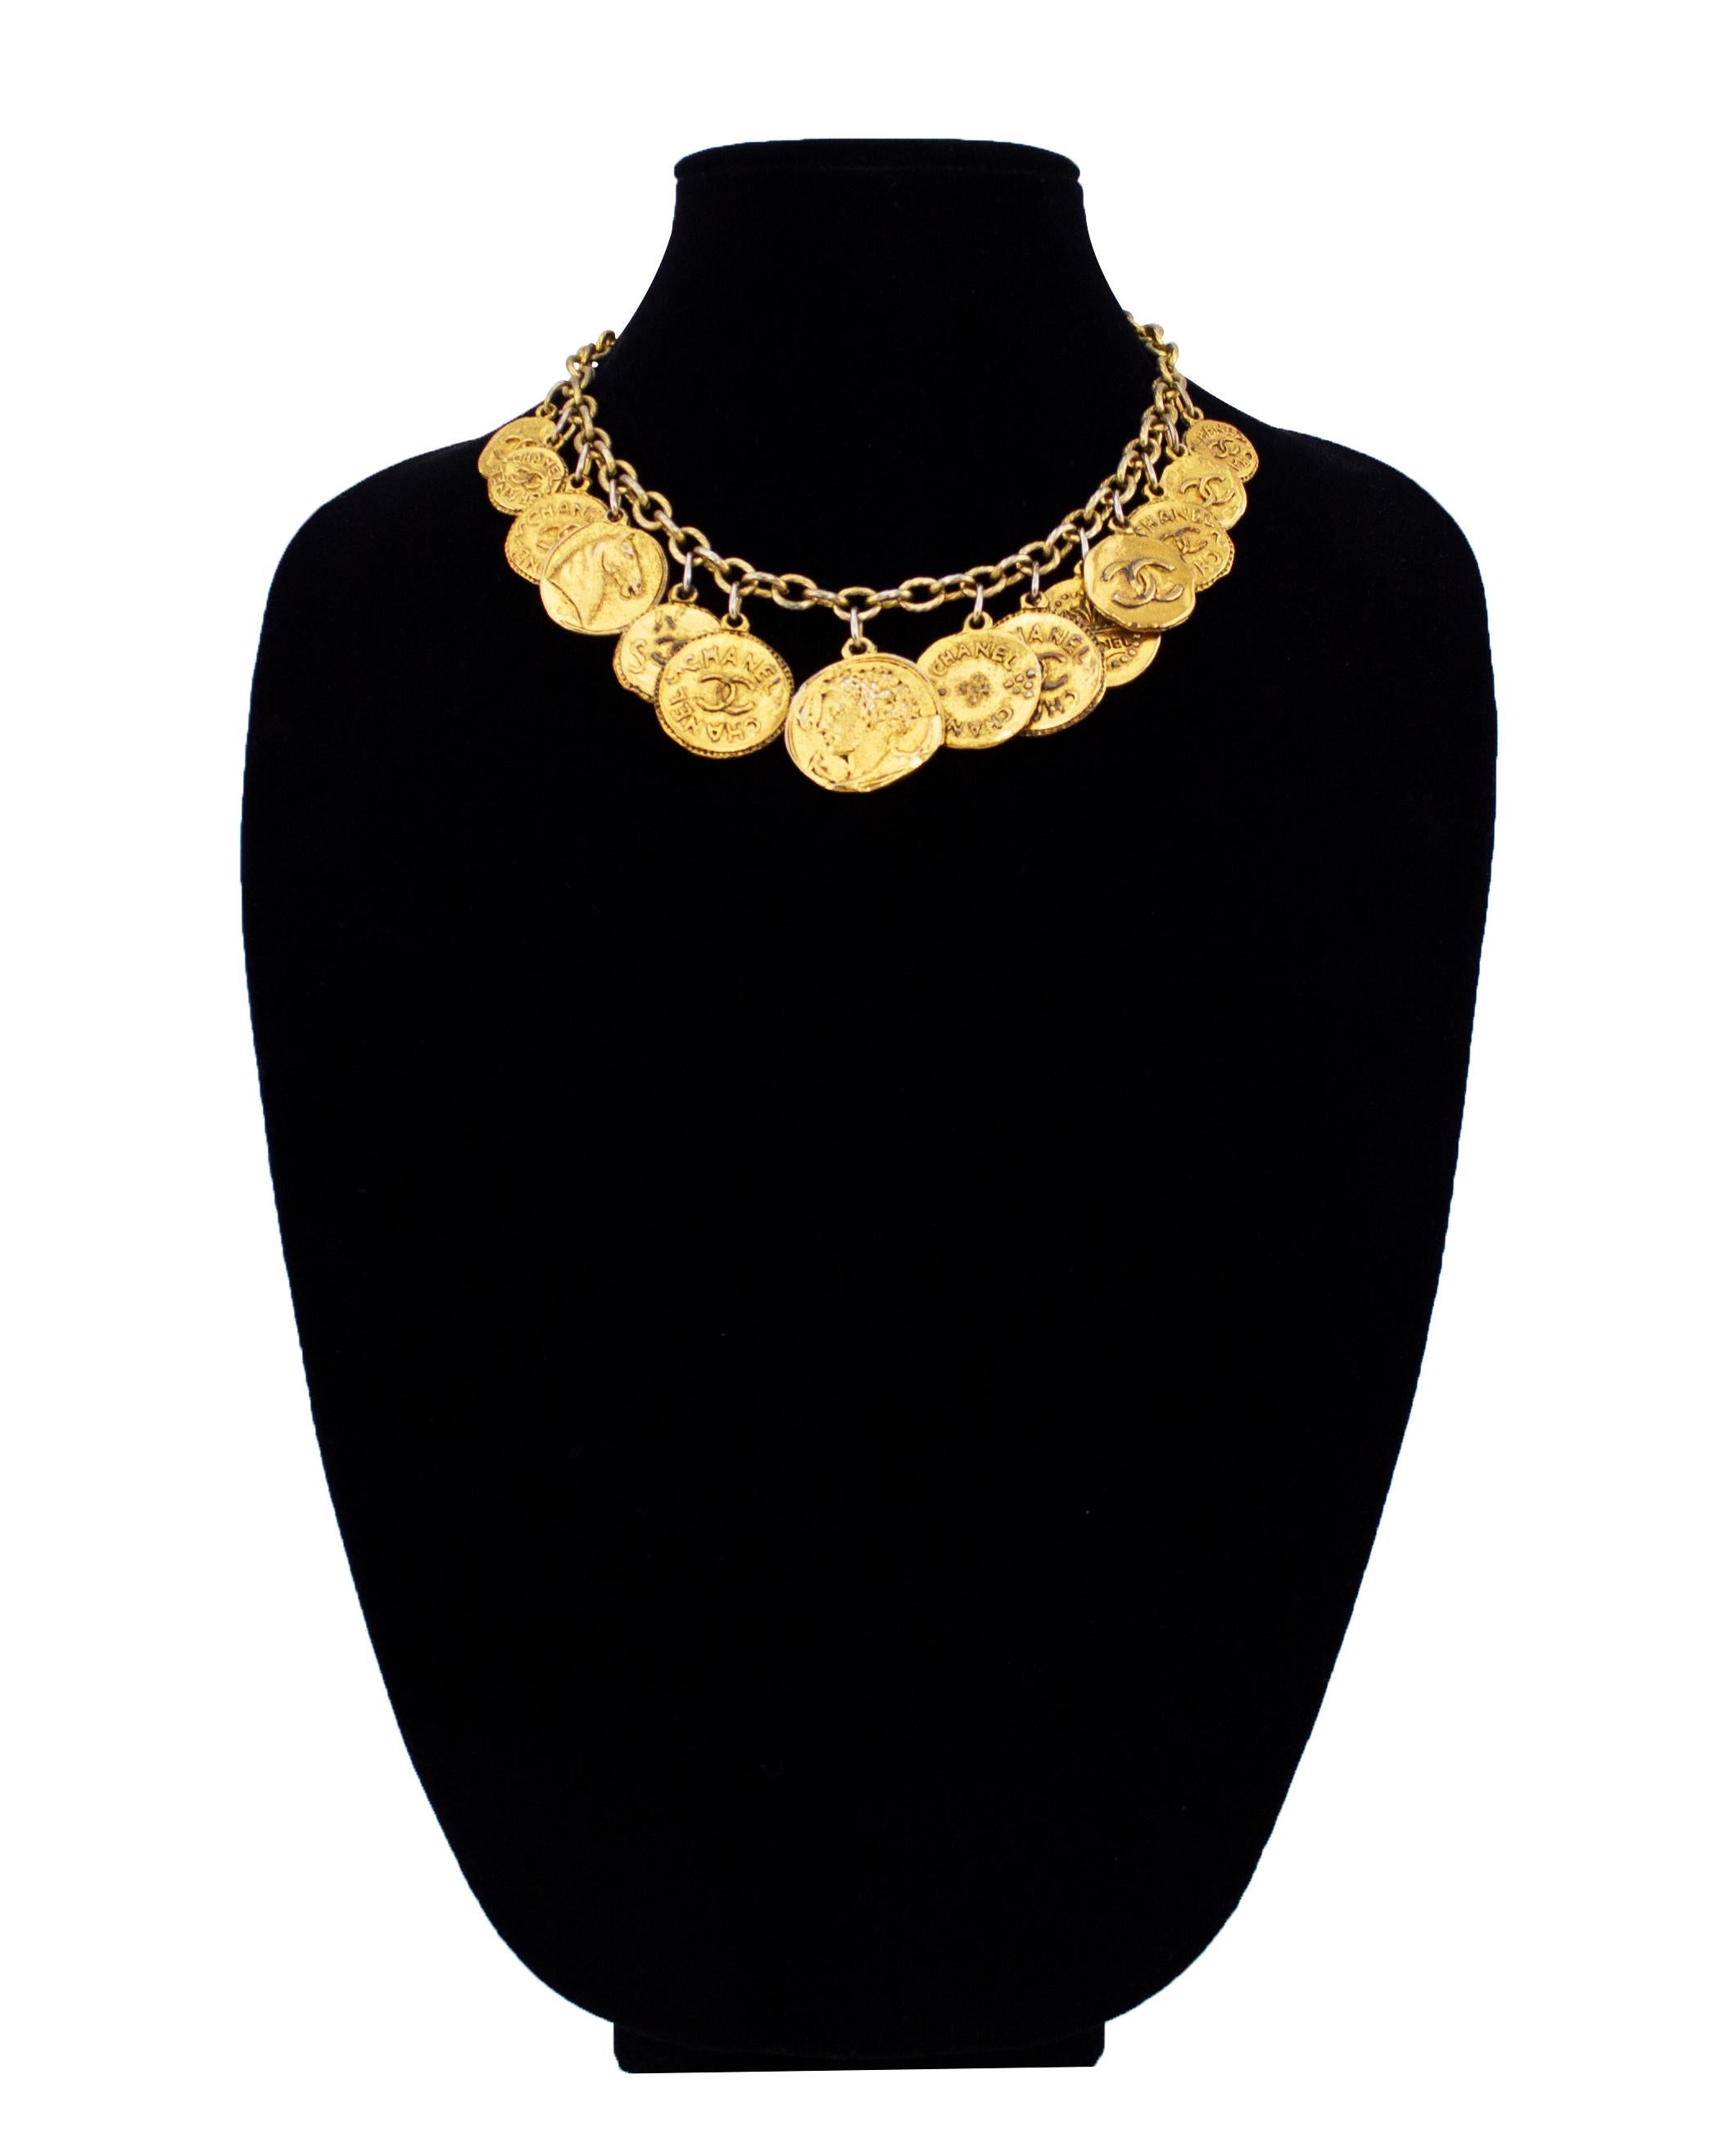 Fabulous 1980s gold tone metal Chanel necklace. Chain links with 14 hanging  Chanel coins. The coins are all different sizes with varying designs, mainly featuring the interlocking double C logo. All the coins were designed to have a